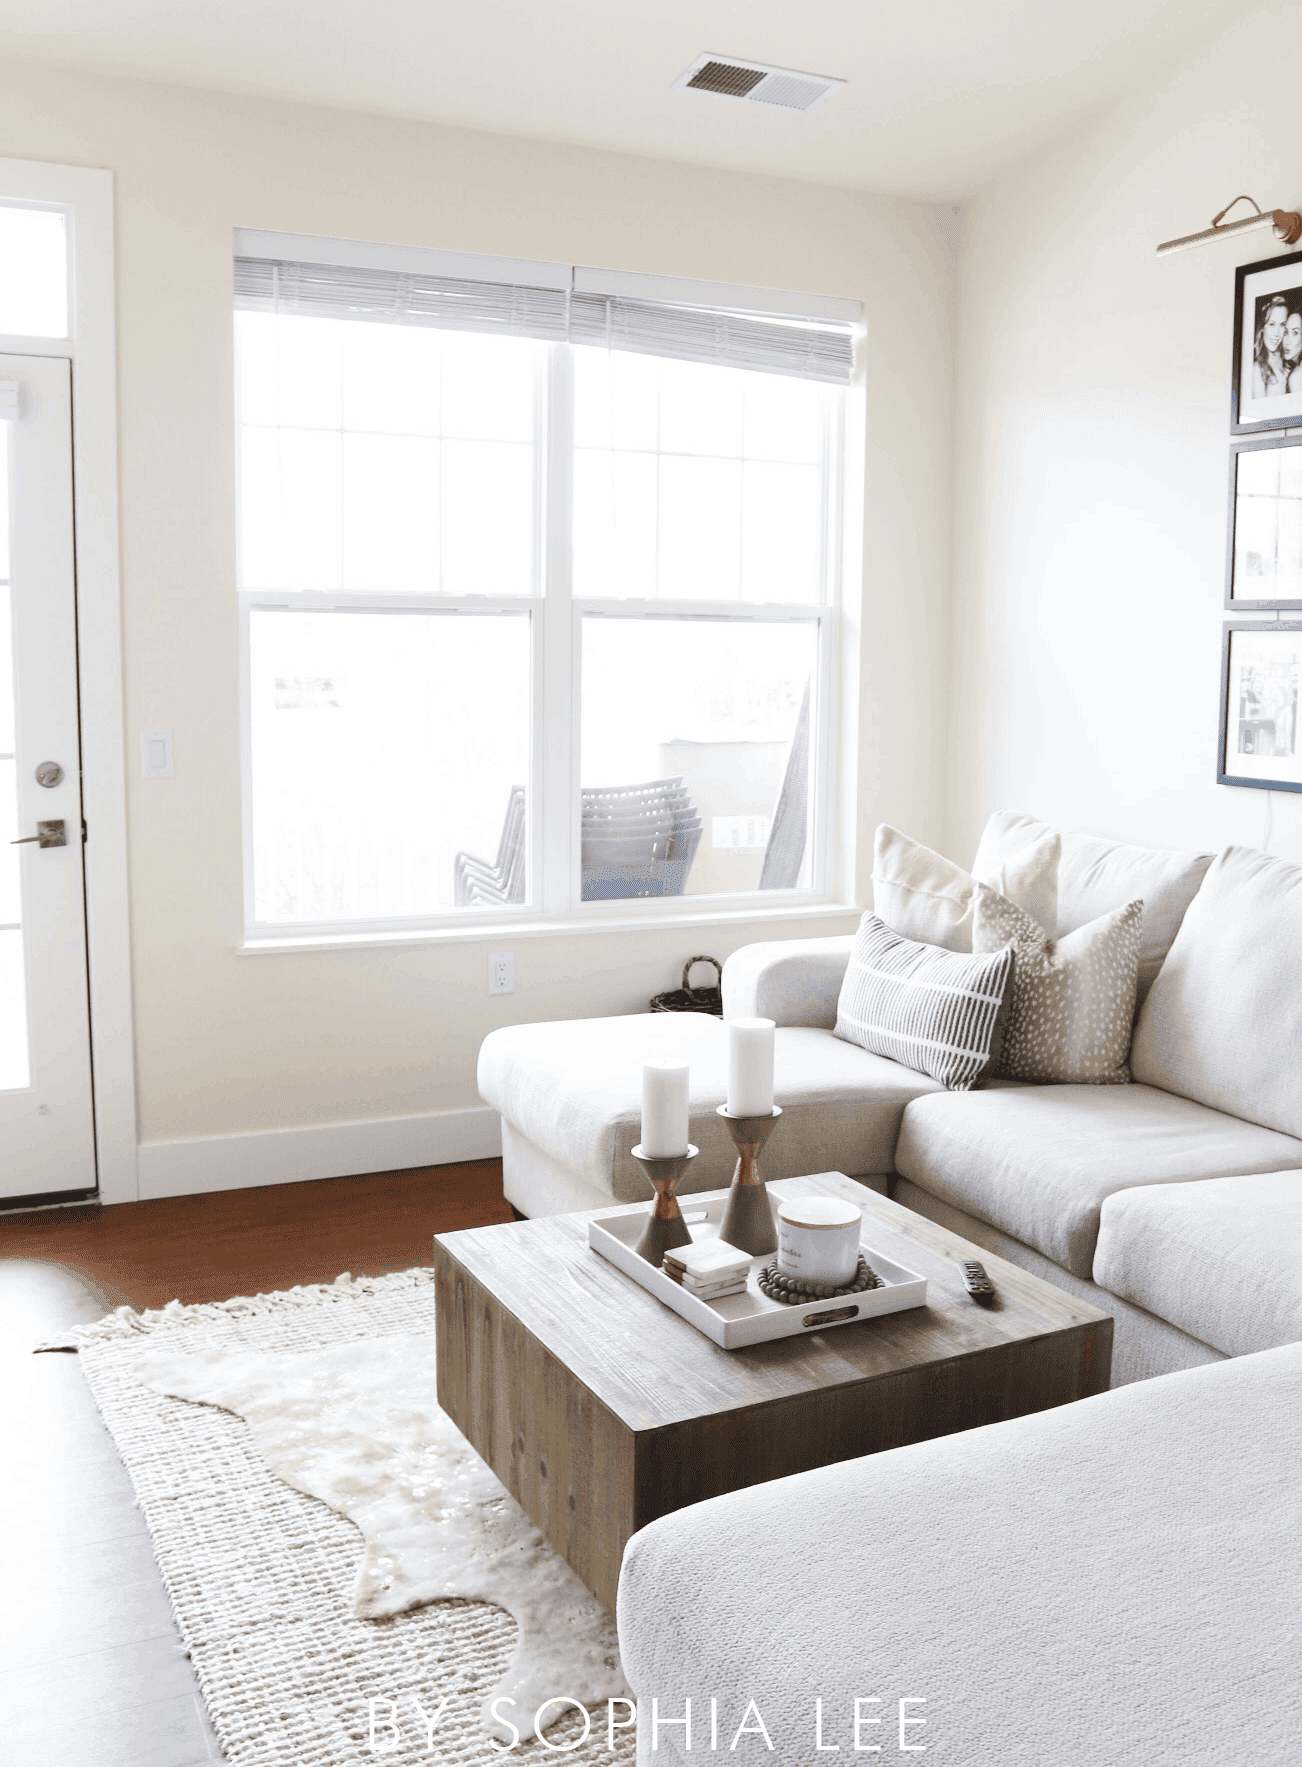 Apartment Decorating: Classic Style on a Budget - Stuffy Muffy